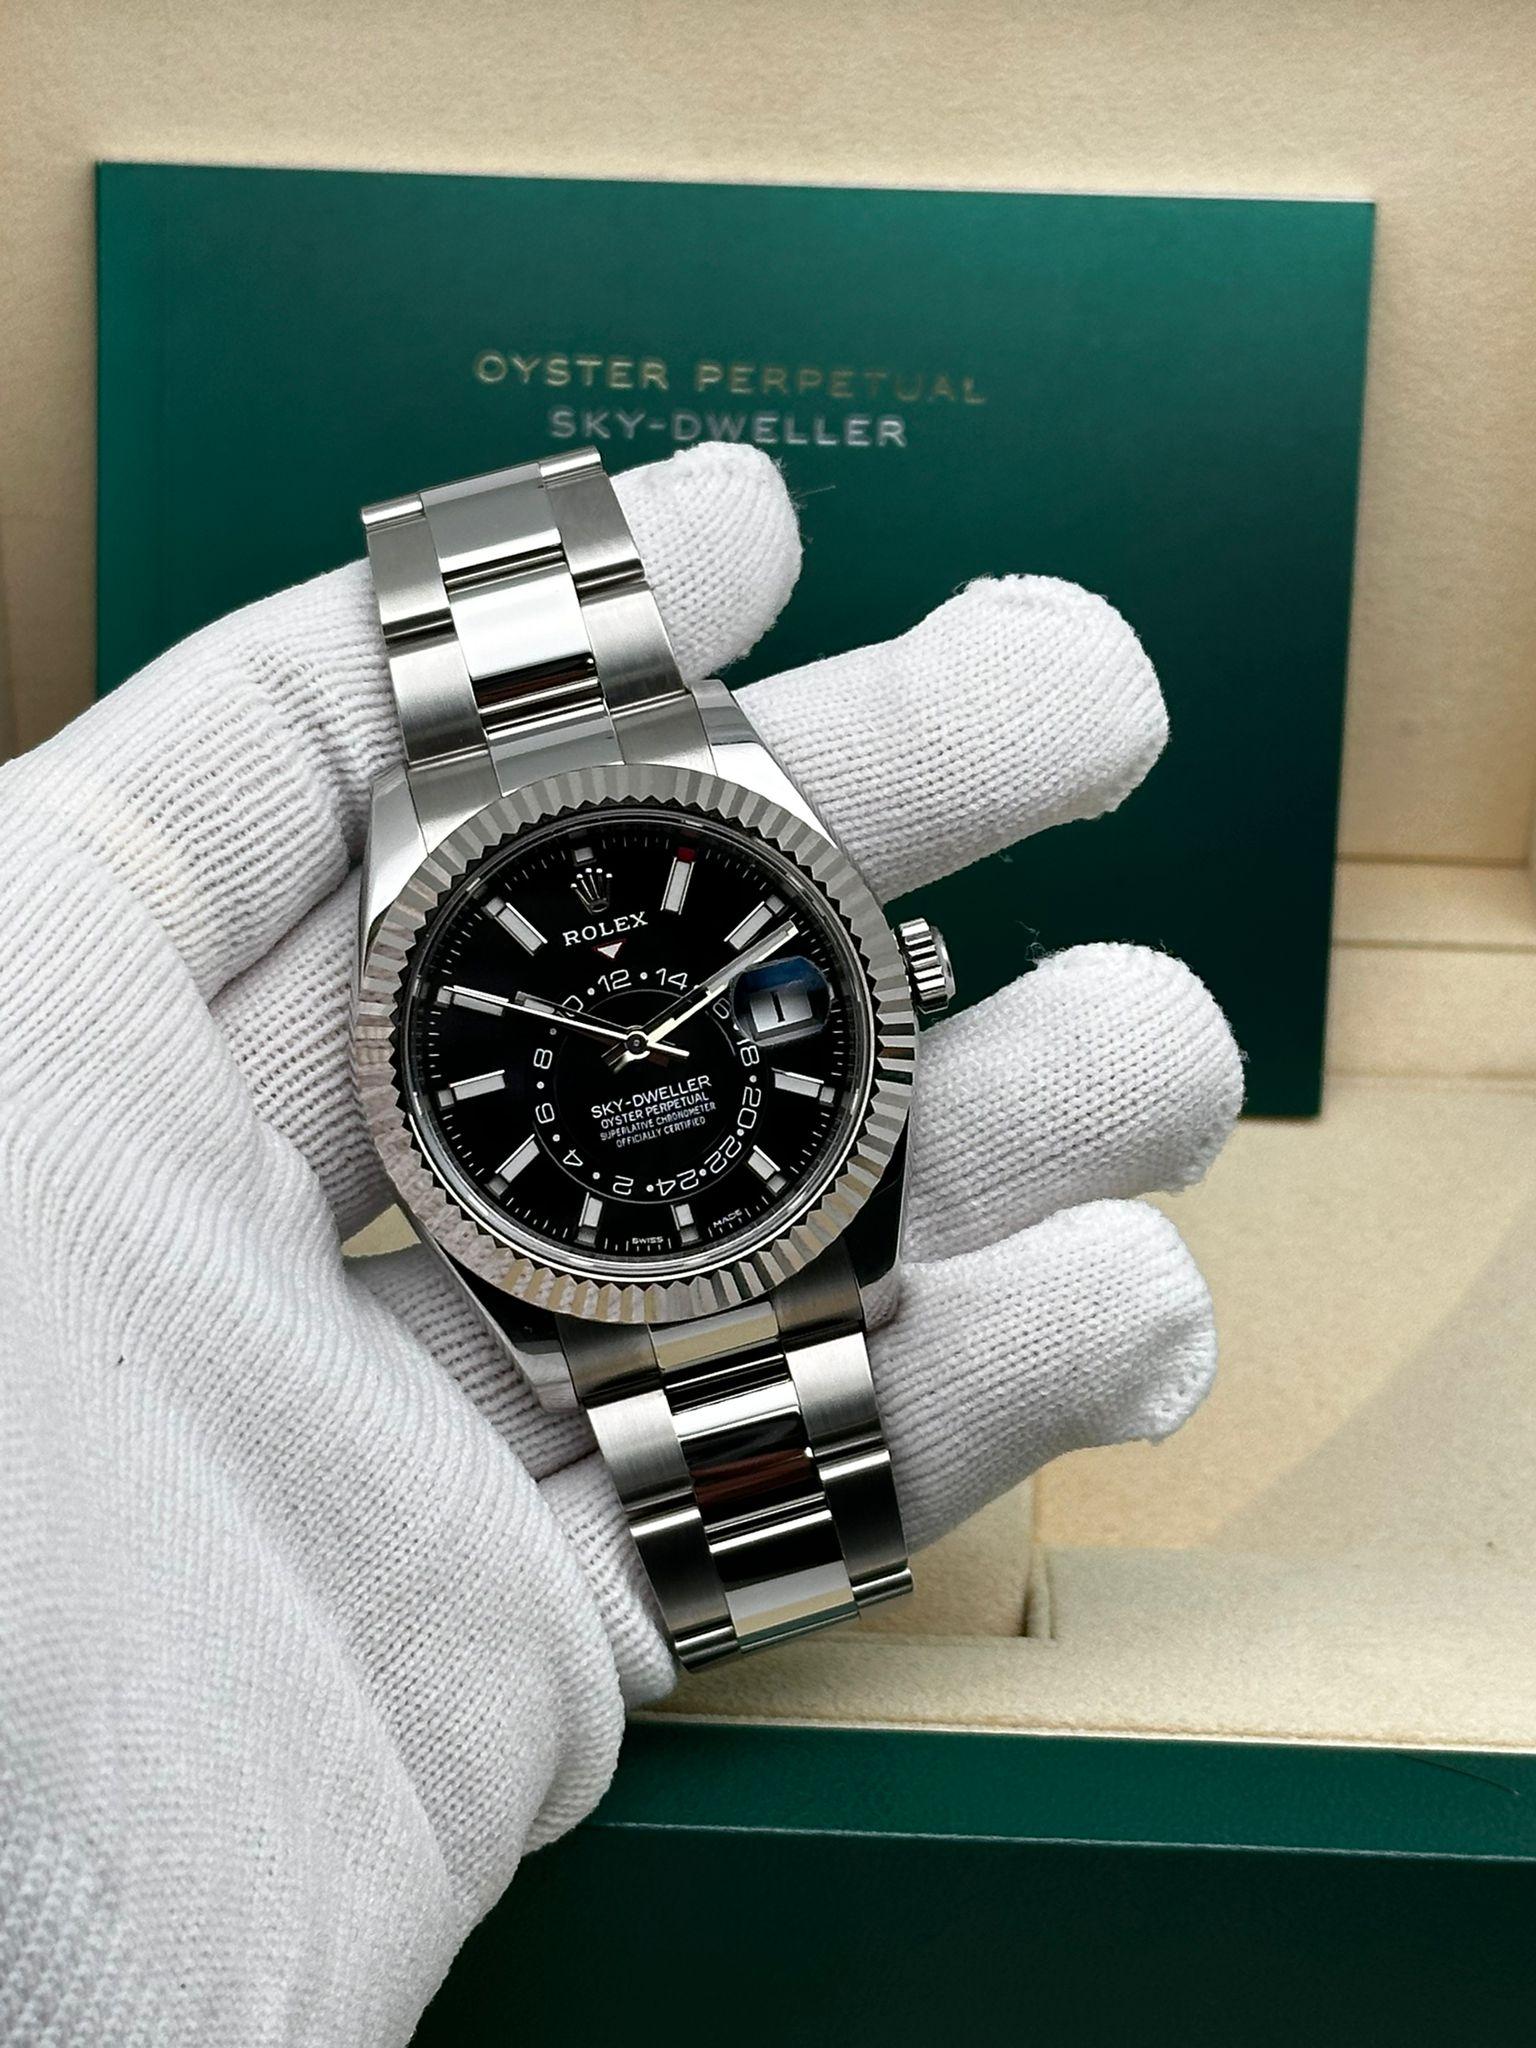 Pre-owned. Comes with the original box and papers.

* Free Shipping within the USA
* Three-year warranty coverage
* 14-day return policy with a full refund. Buyers can verify the watch's authenticity at any boutique or dealership within this